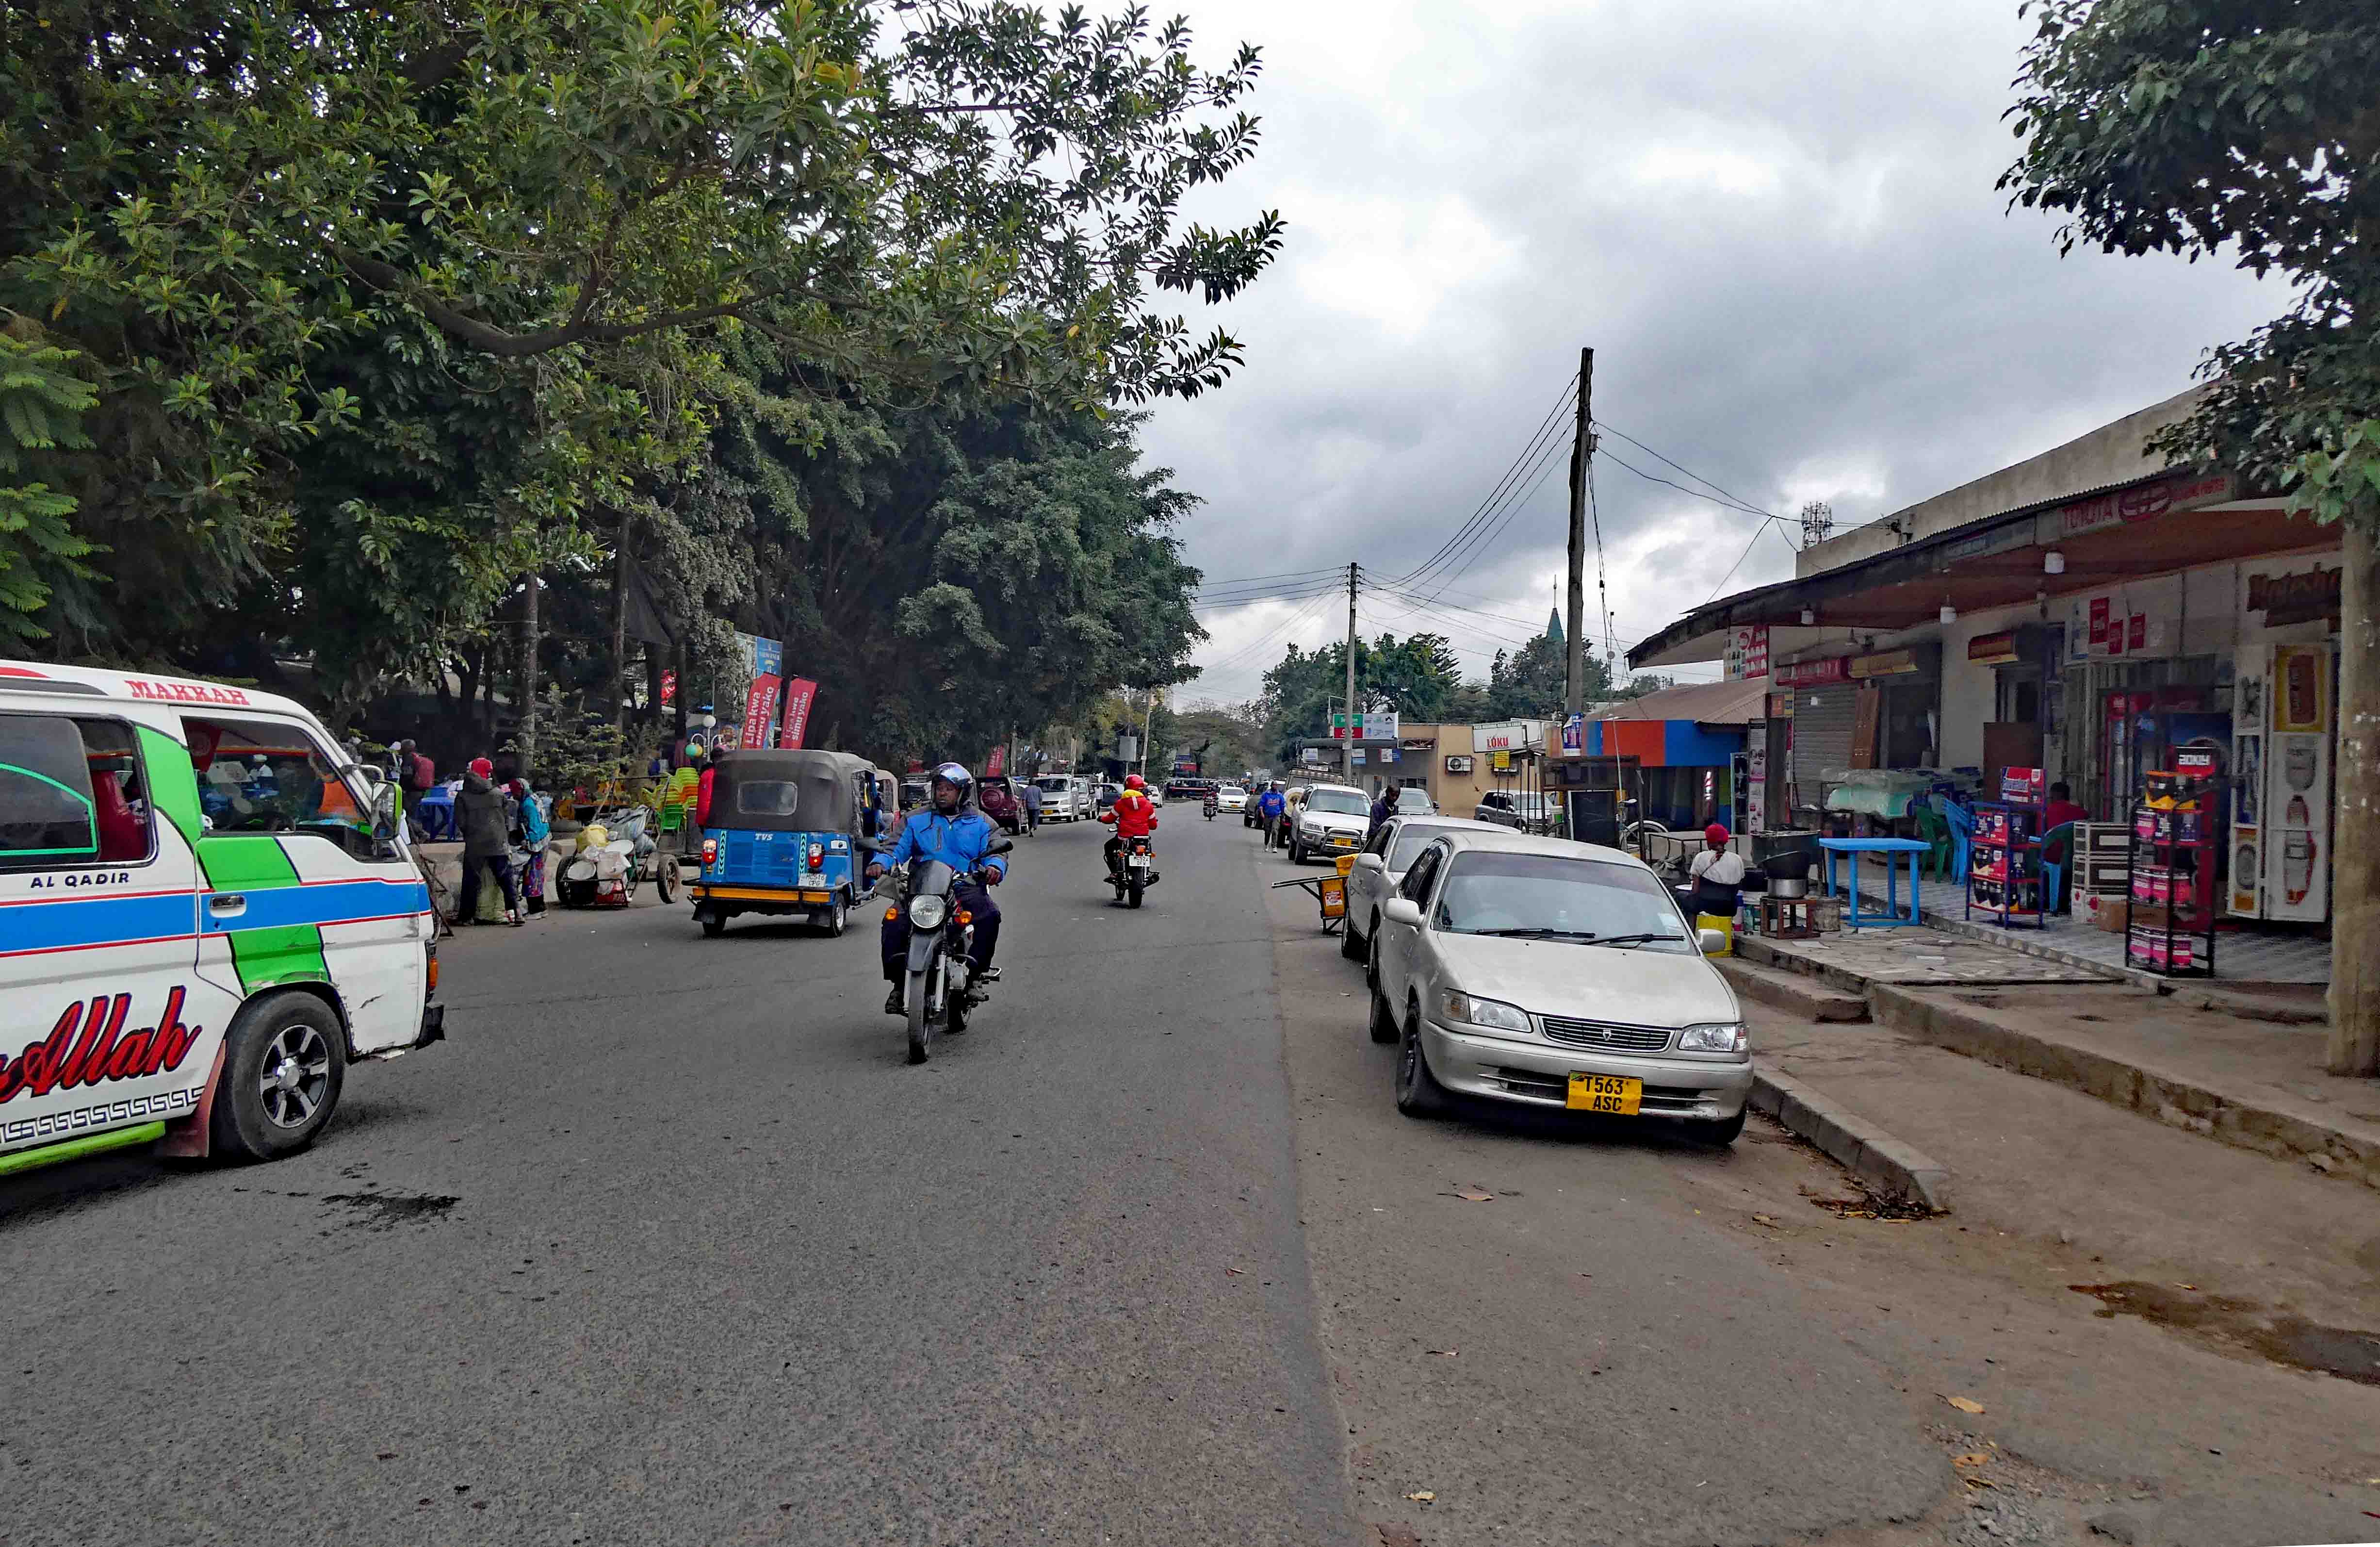 Paved streets symbolize a prosperous town in Tanzania